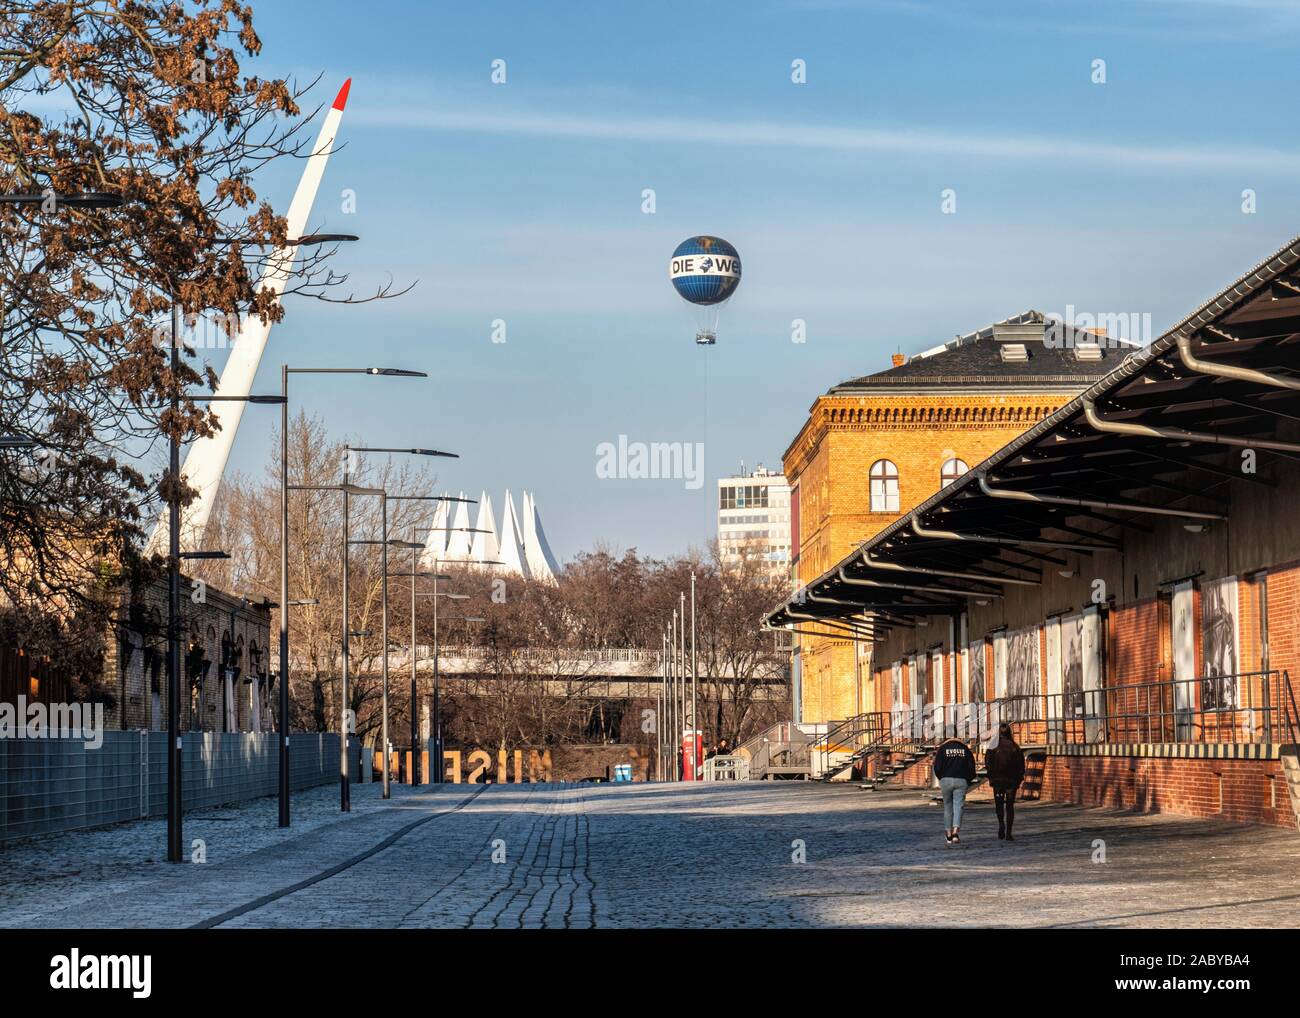 Wind Turbine Blade Hot Air Balloon Old Freight Yard Buildings In Grounds Of German Museum Of Science Technology In Kreuzberg Berlin Stock Photo Alamy